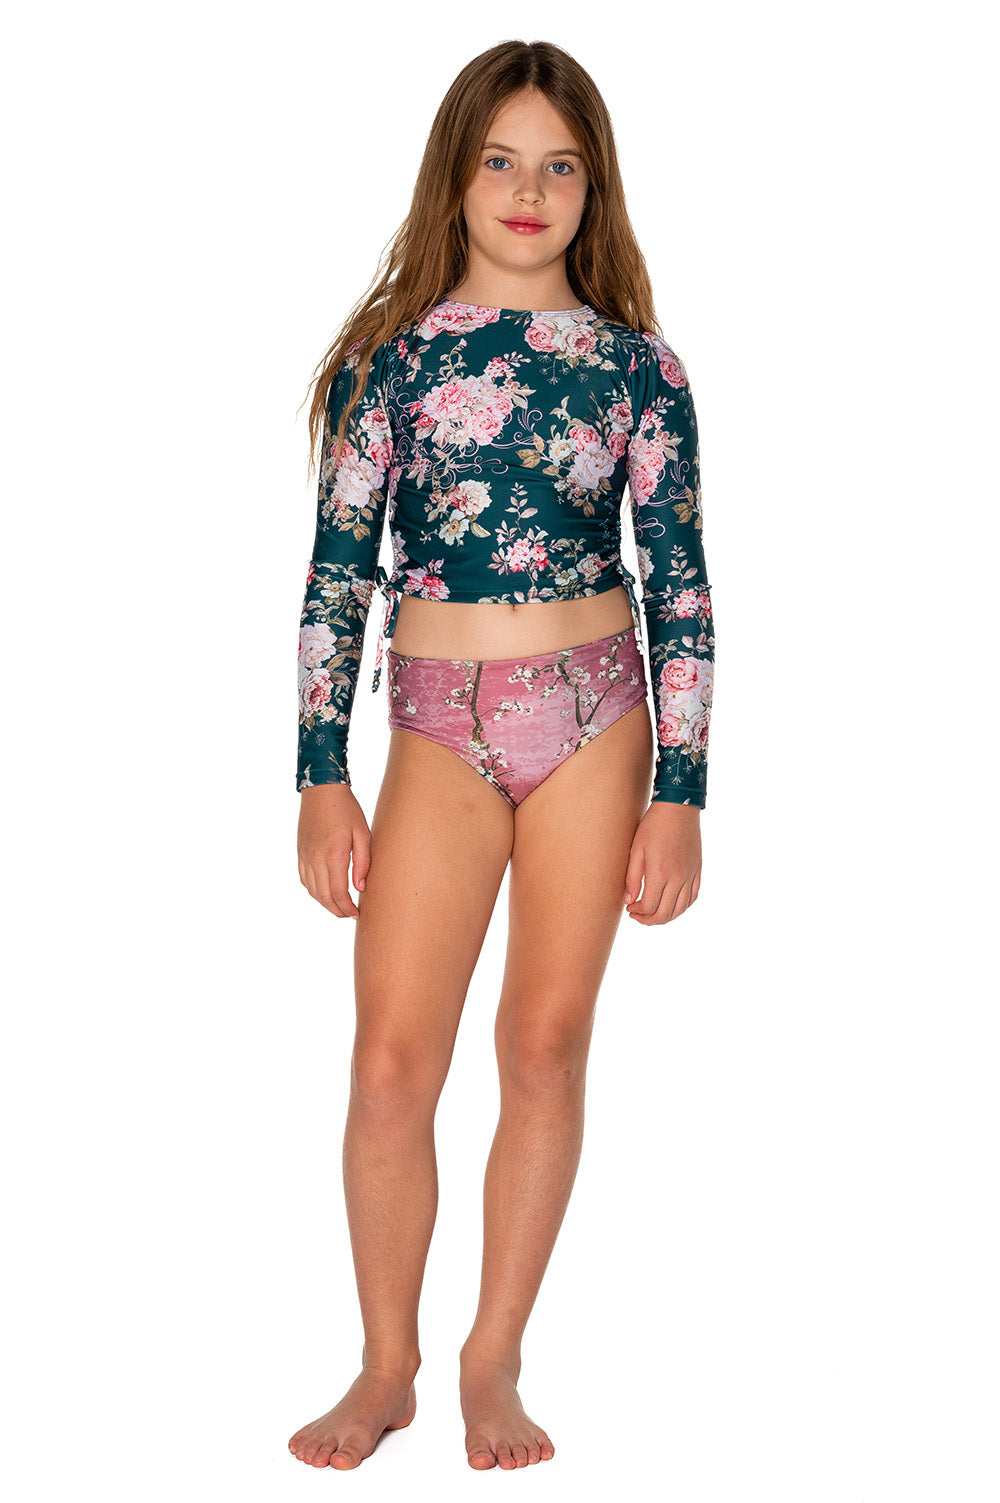 Girls Long Sleeve Swim Set - Navy Blue Floral - Passionate - Front 2